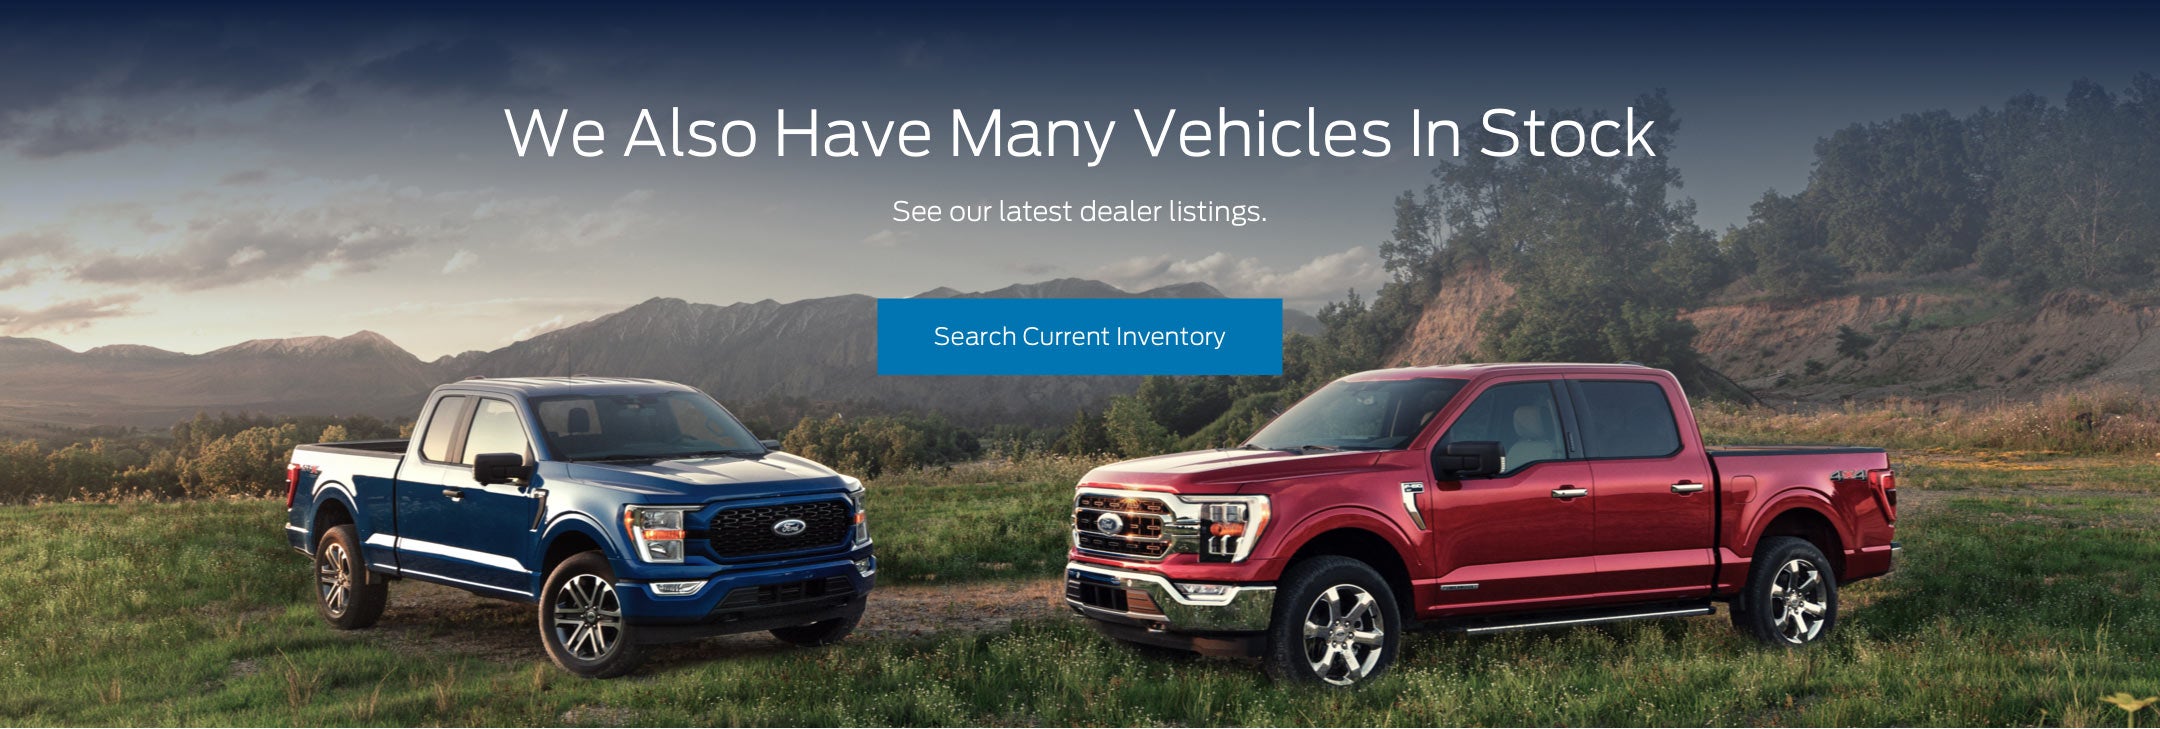 Ford vehicles in stock | Asheville Ford in Asheville NC